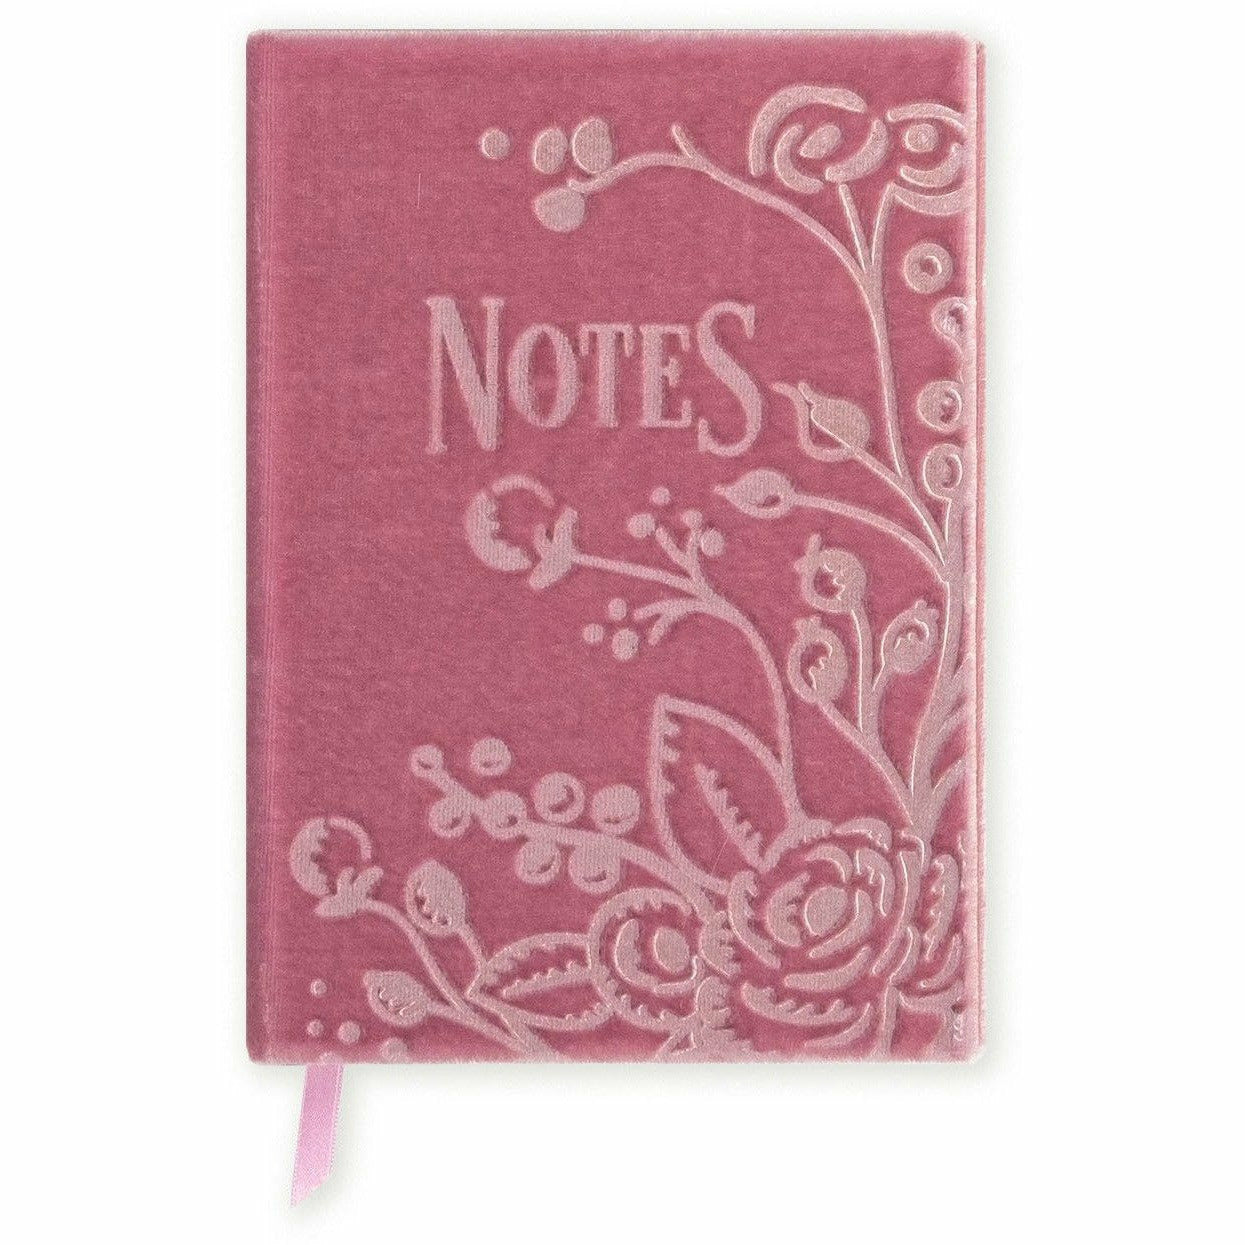 Petite Velvet Notes Floral Book - The First Snow